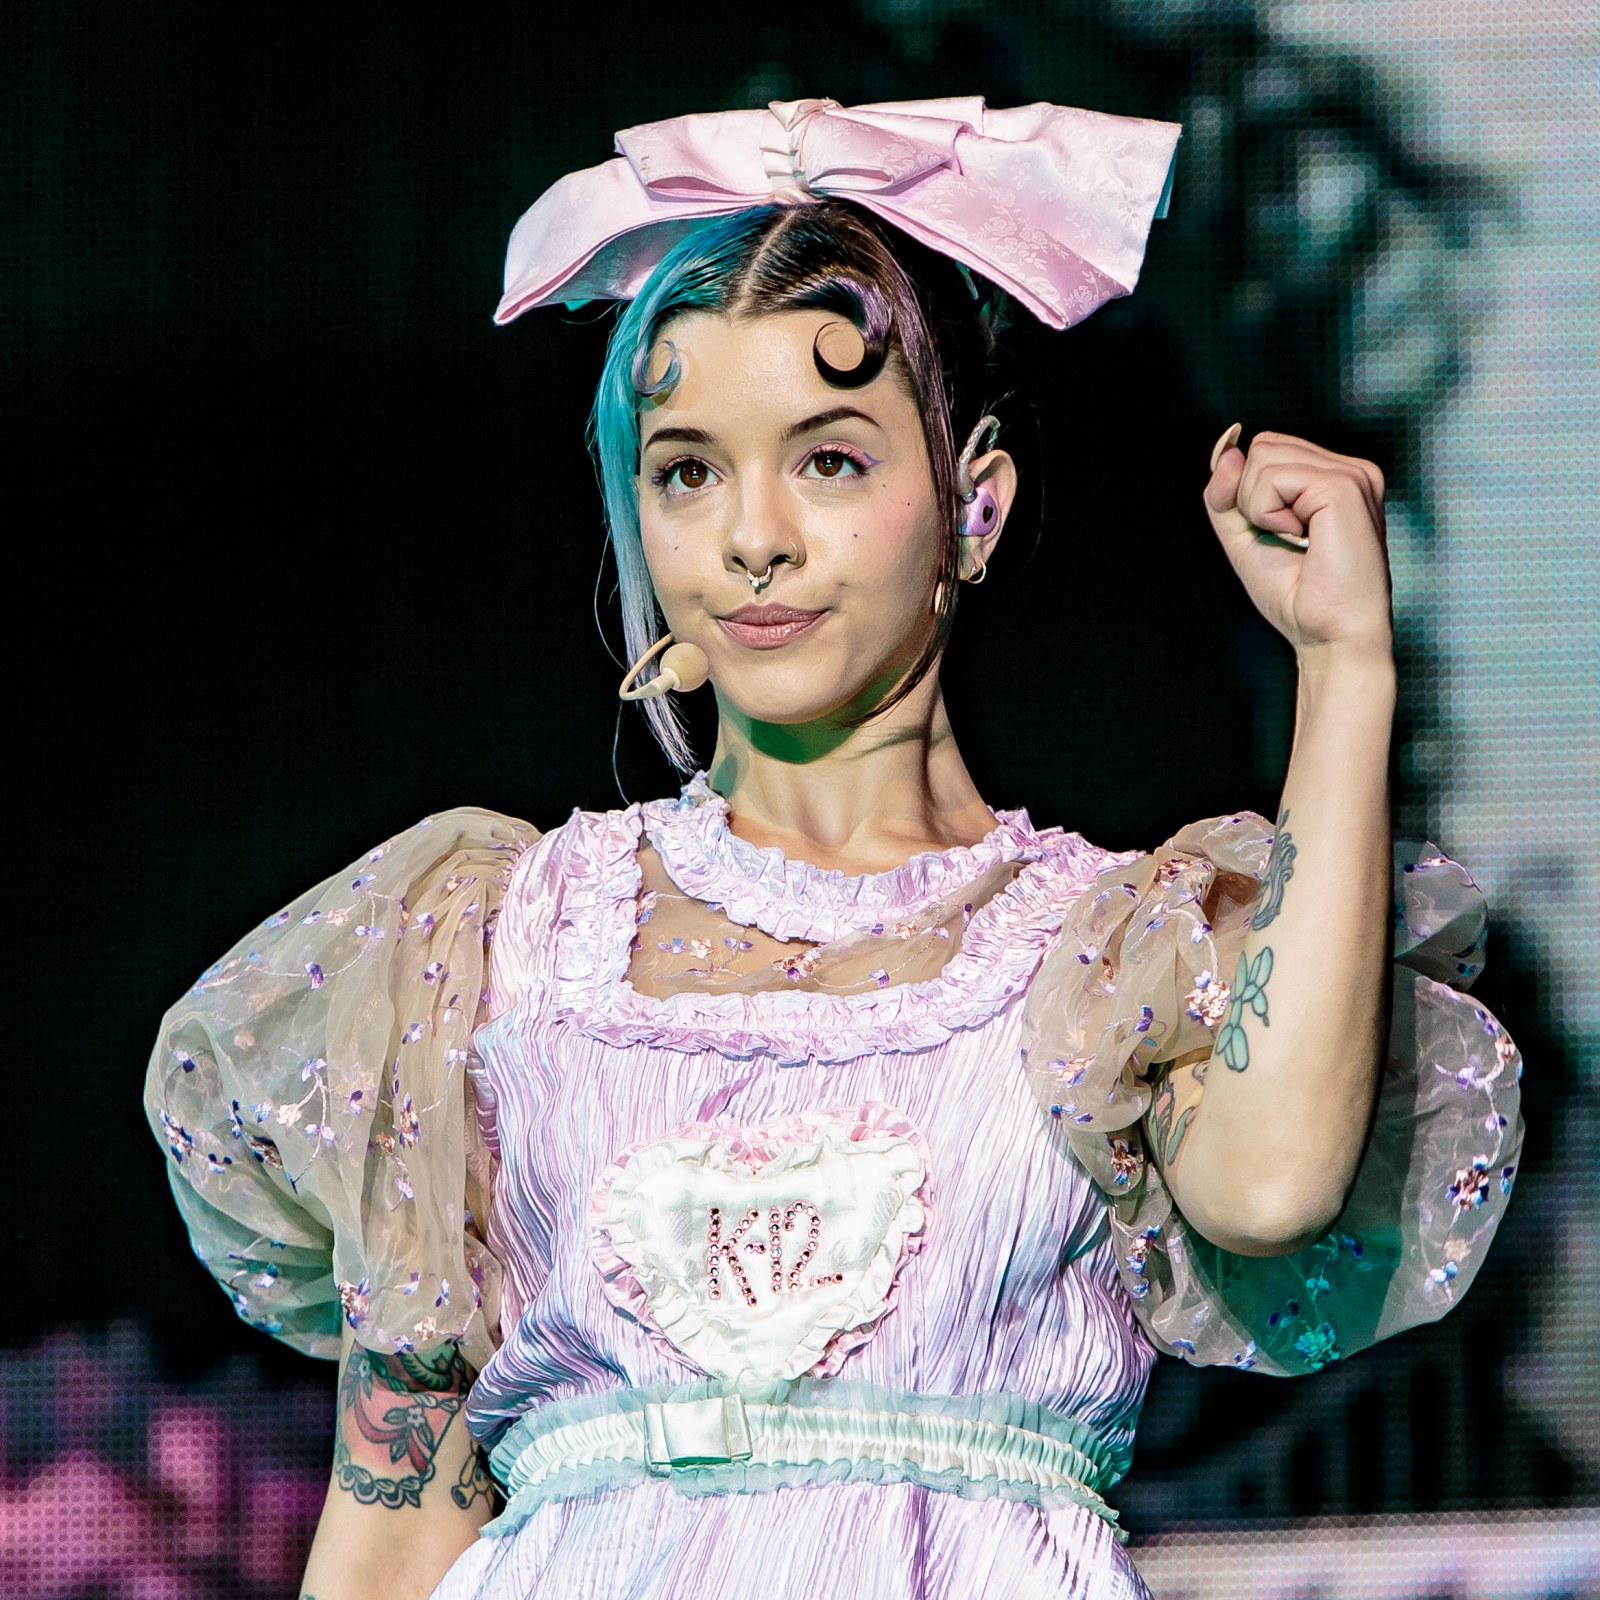 Melanie Martinez Mic Cuts Out During Concert As Palestinian Flag